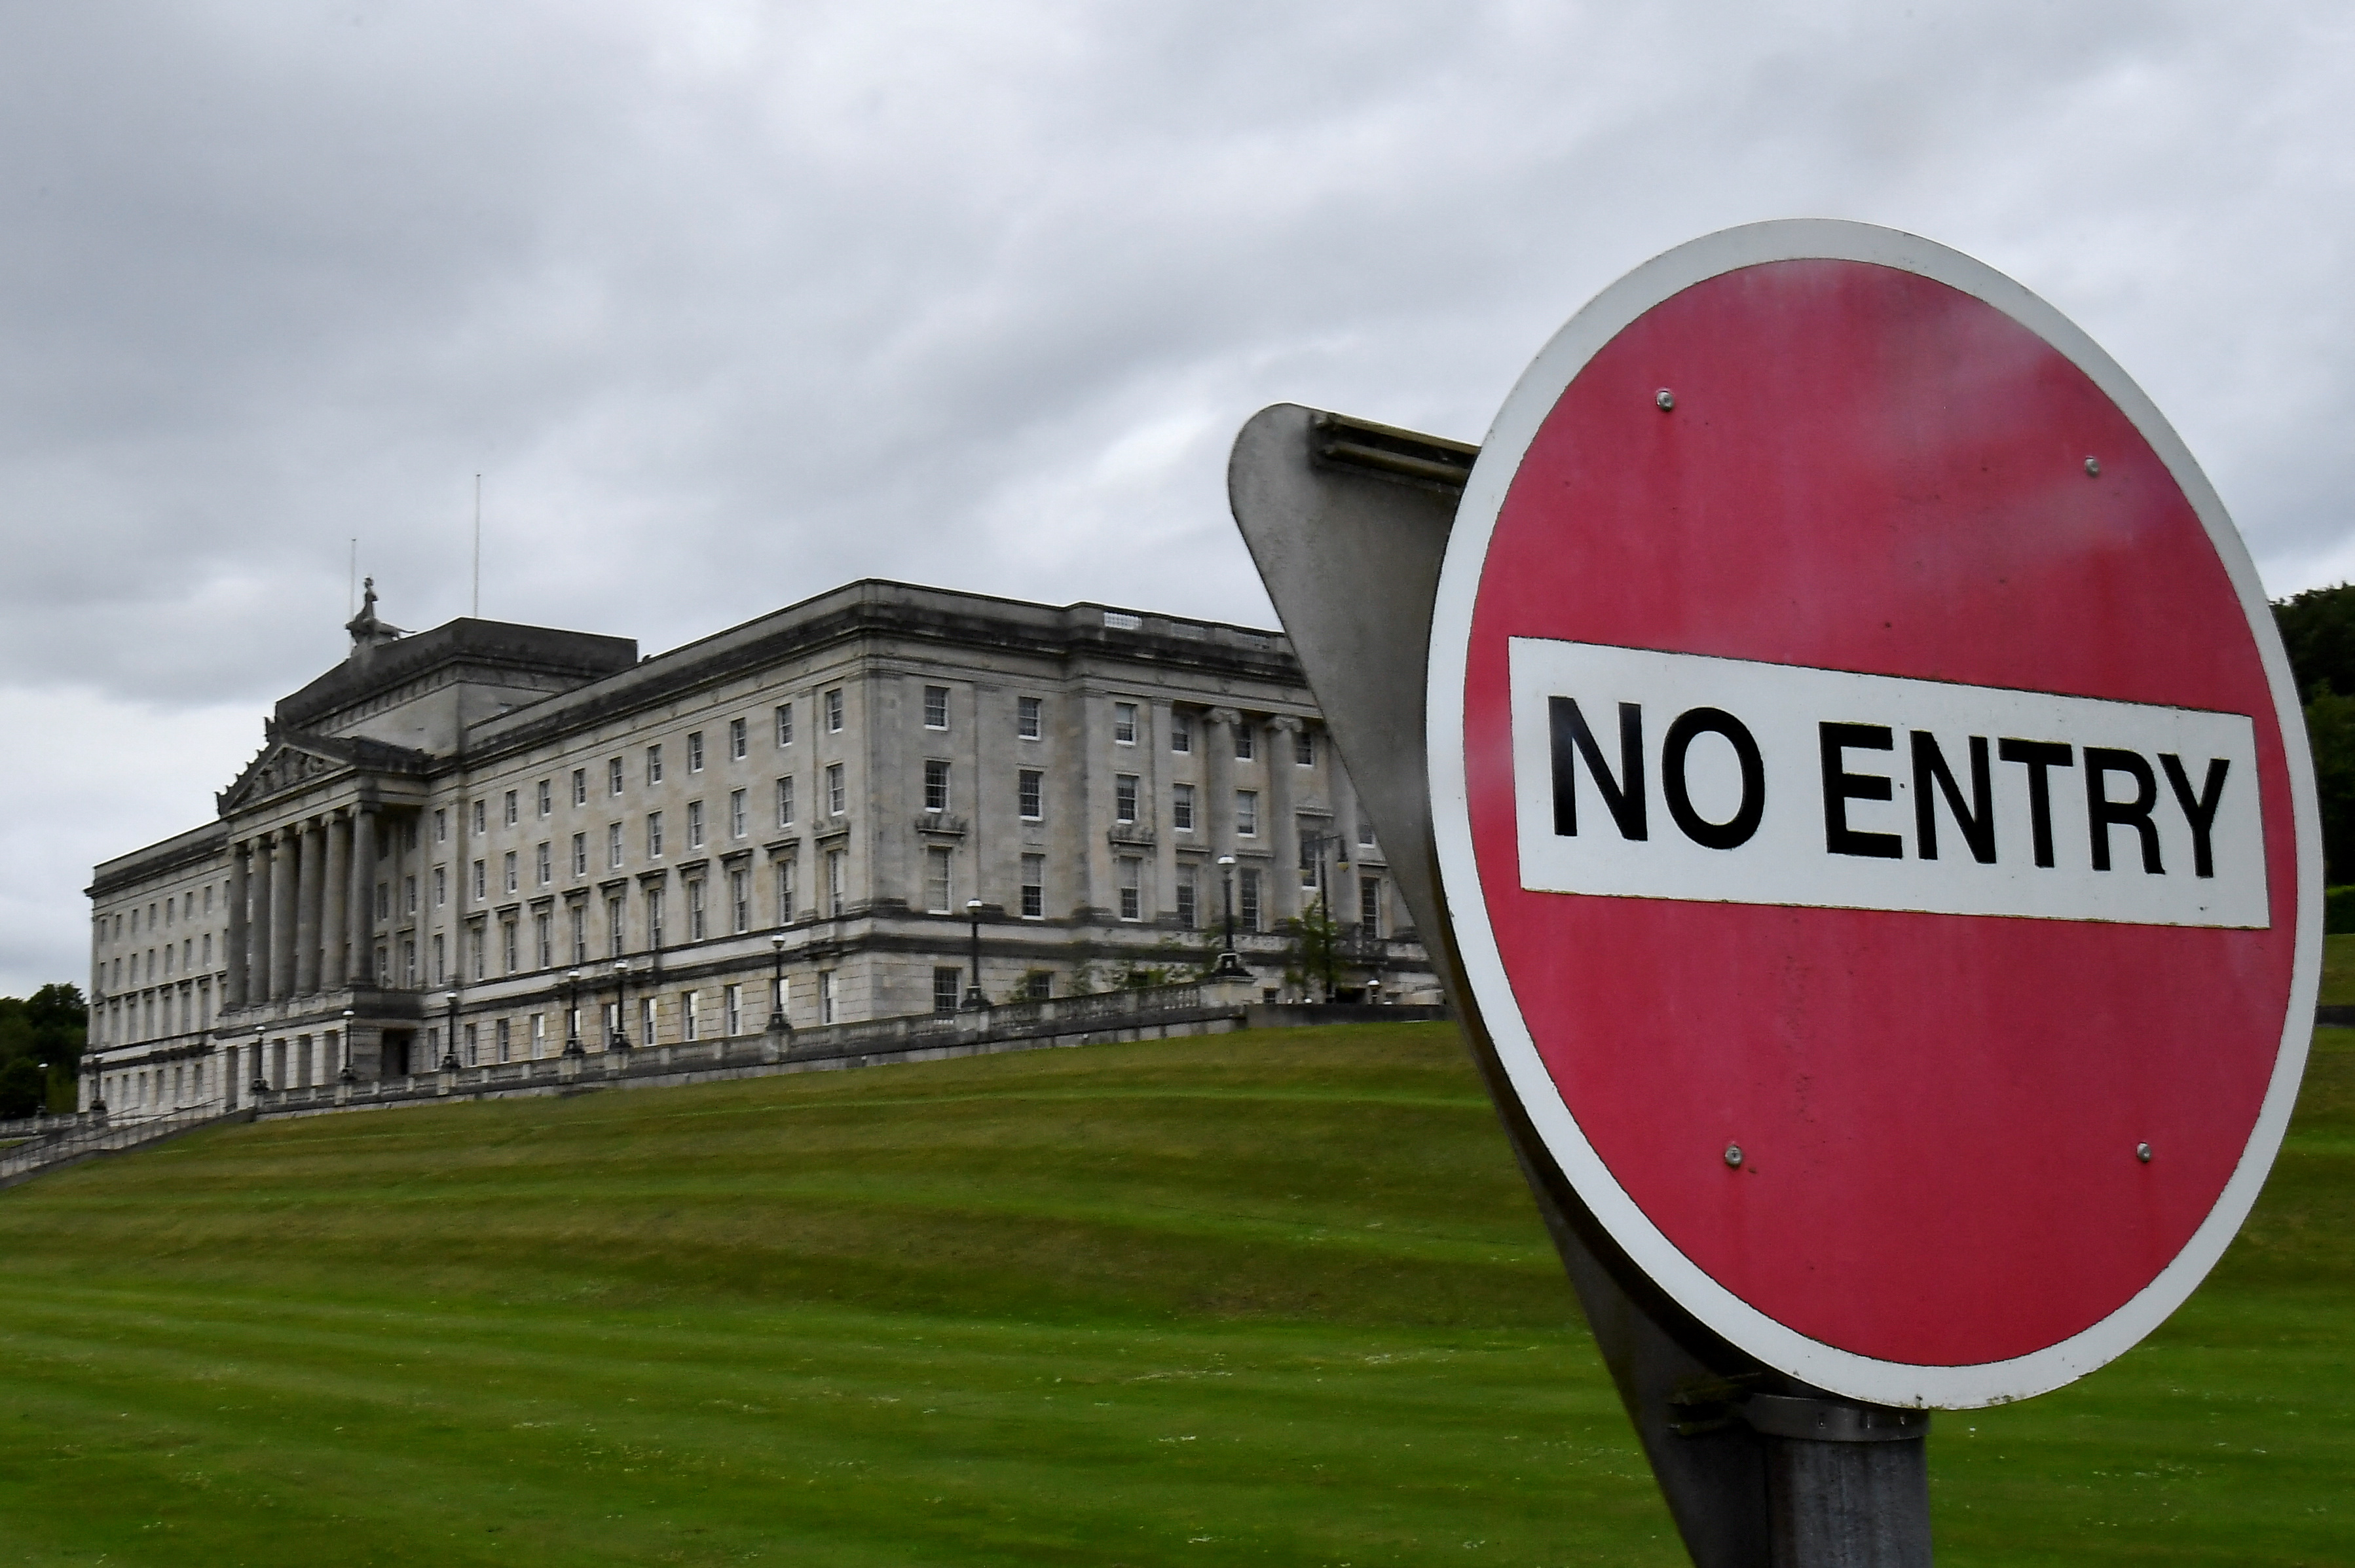 A 'no entry' sign is seen near the Stormont Parliament Buildings on the day Britain is expected to publish a bill to unilaterally scrap some of the rules governing post-Brexit trade with Northern Ireland, as its dispute with the European Union over the protocol has not yet been resolved, in Belfast, Northern Ireland June 13, 2022. REUTERS/Clodagh Kilcoyne